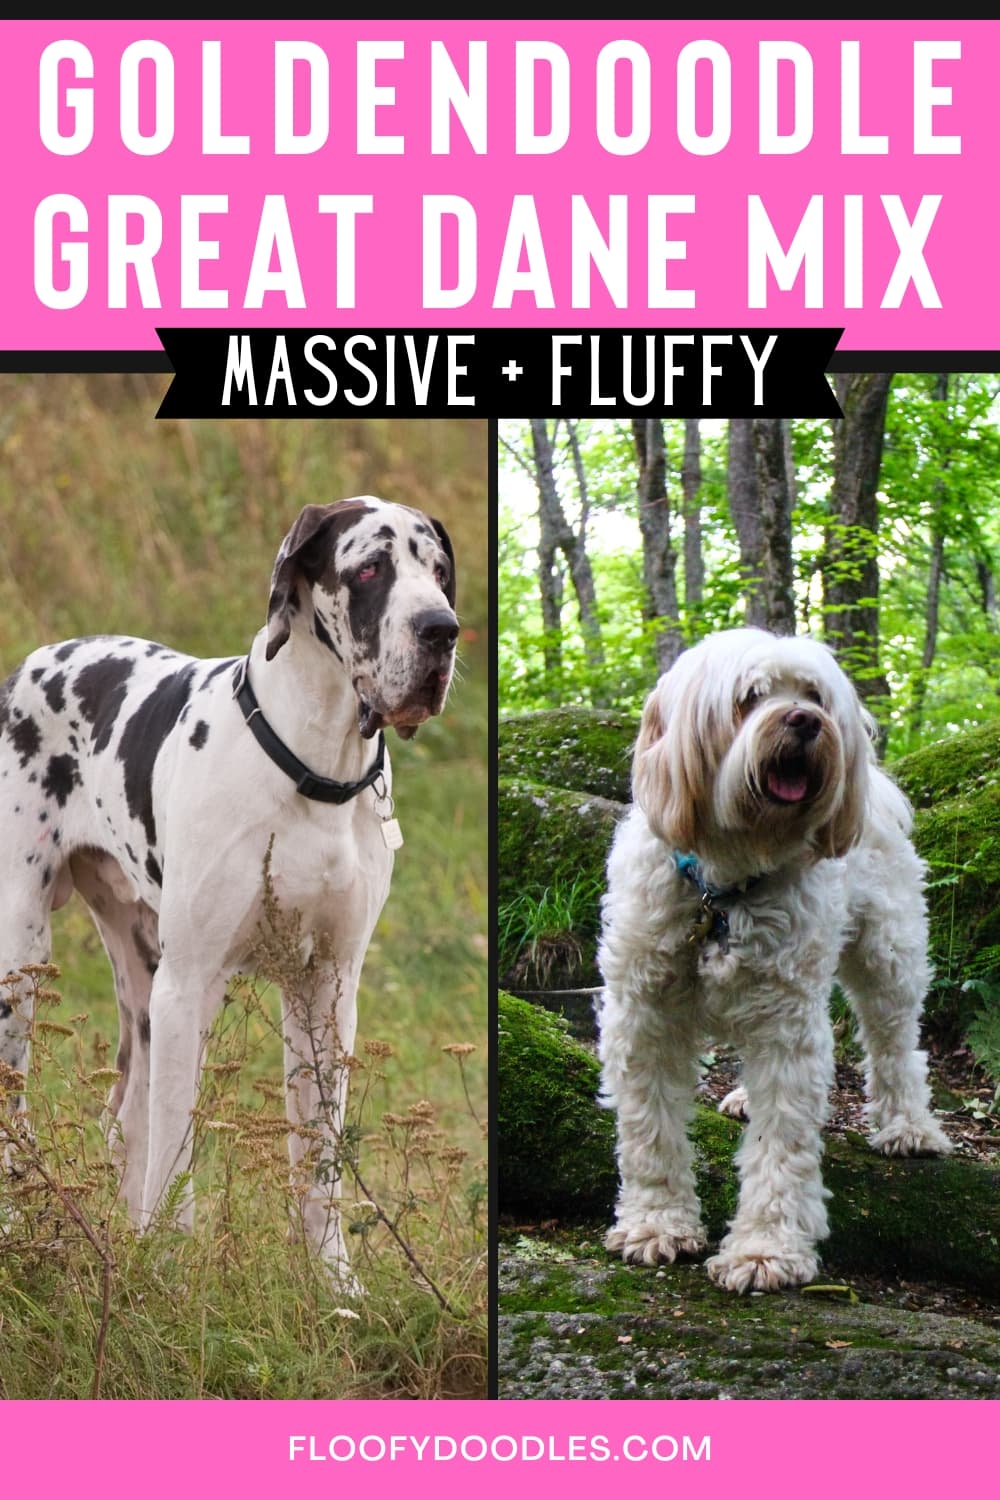 Great Dane next to a Goldendoodle with text saying "Goldendoodle Great Dane Mix". Pink background and white text.